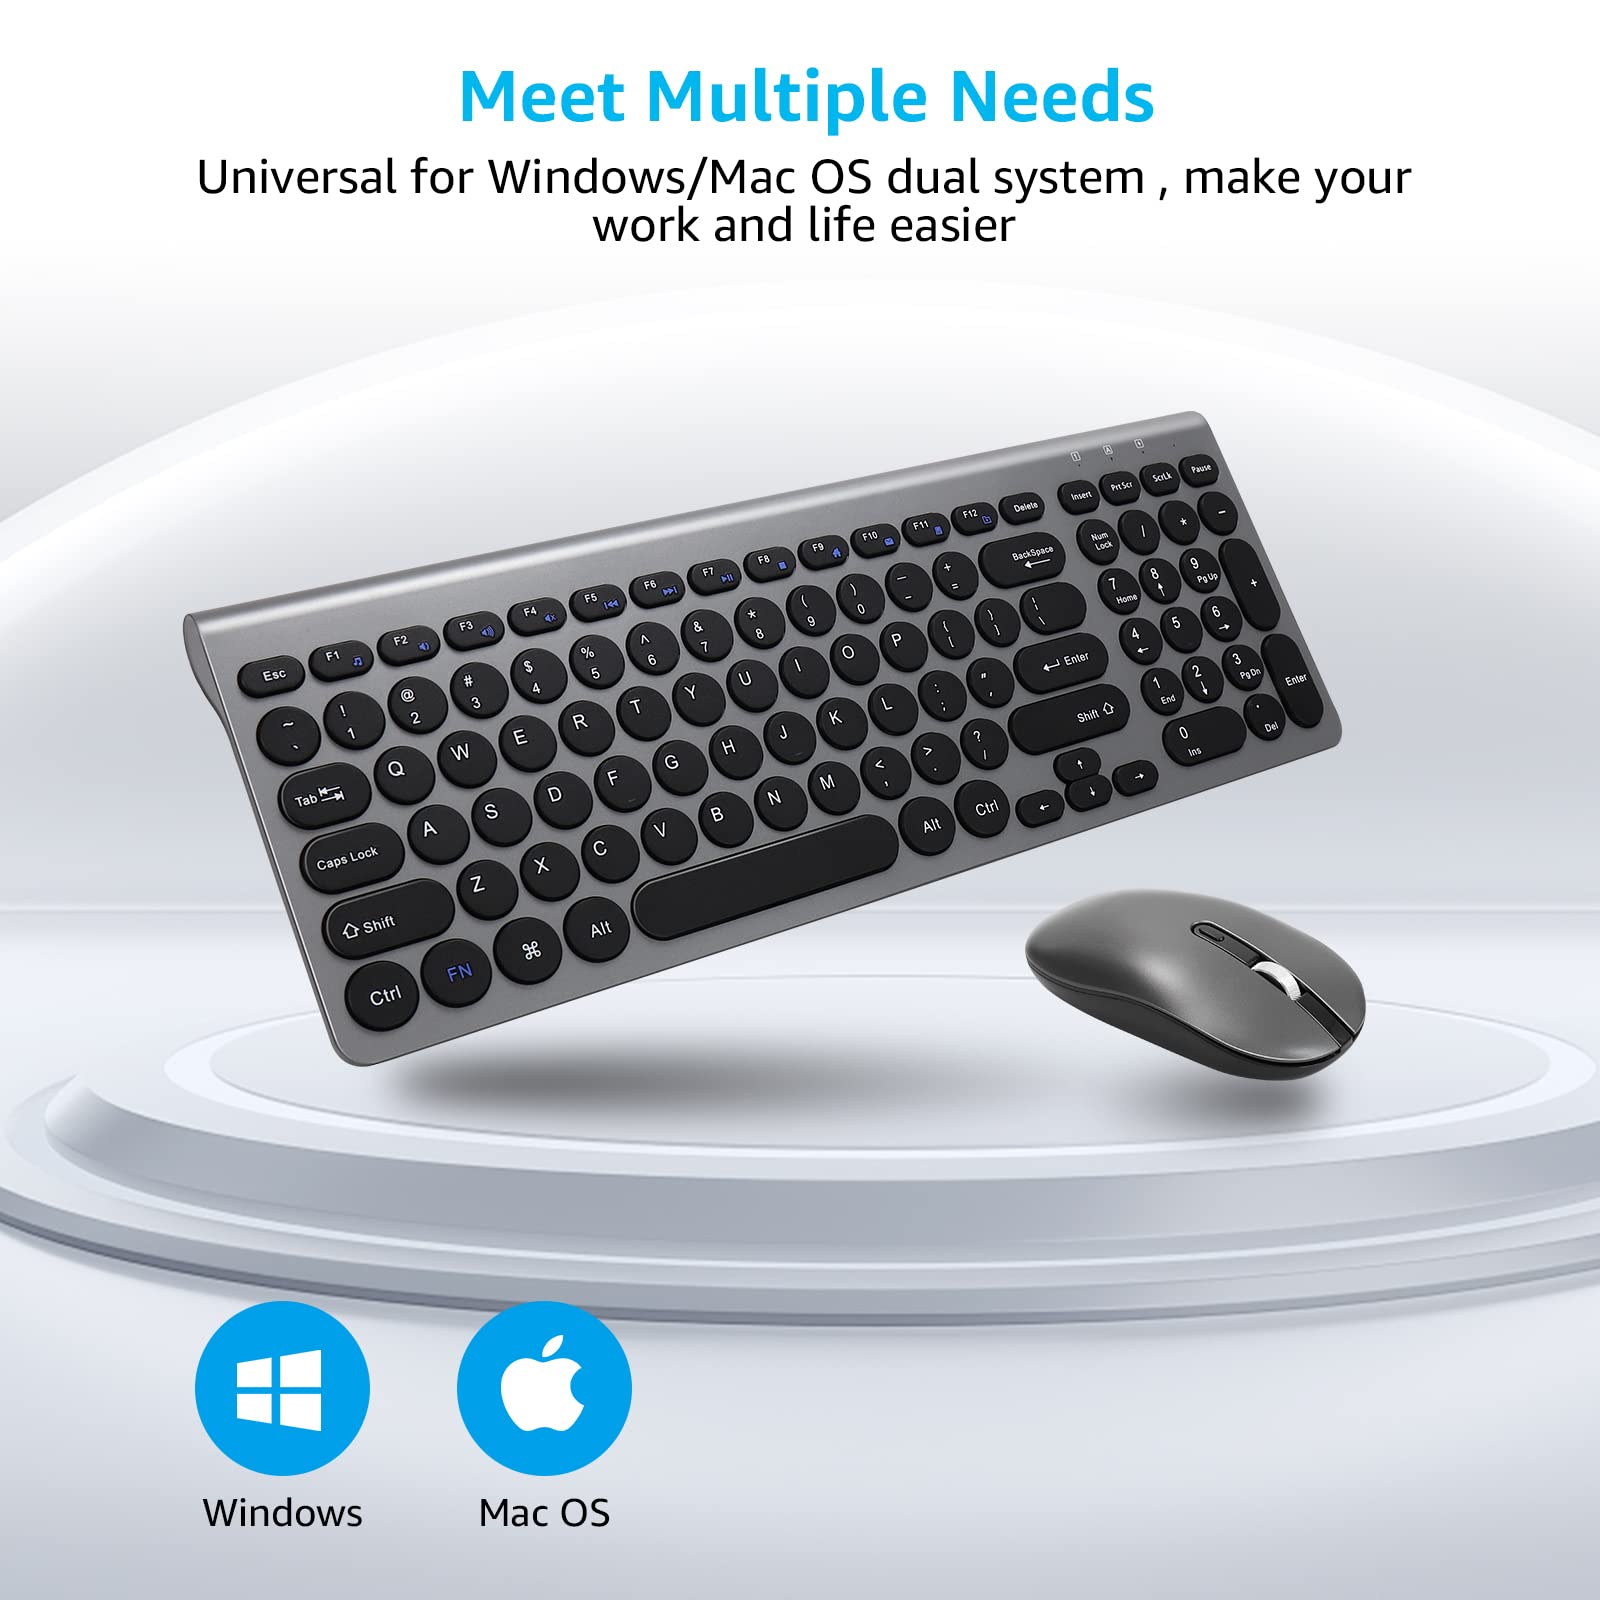 LeadsaiL Wireless Keyboard and Mouse Combo, Wireless USB Mouse and Computer Keyboard Set, Compact and Silent for Windows Laptop, Desktop, PC- Grey